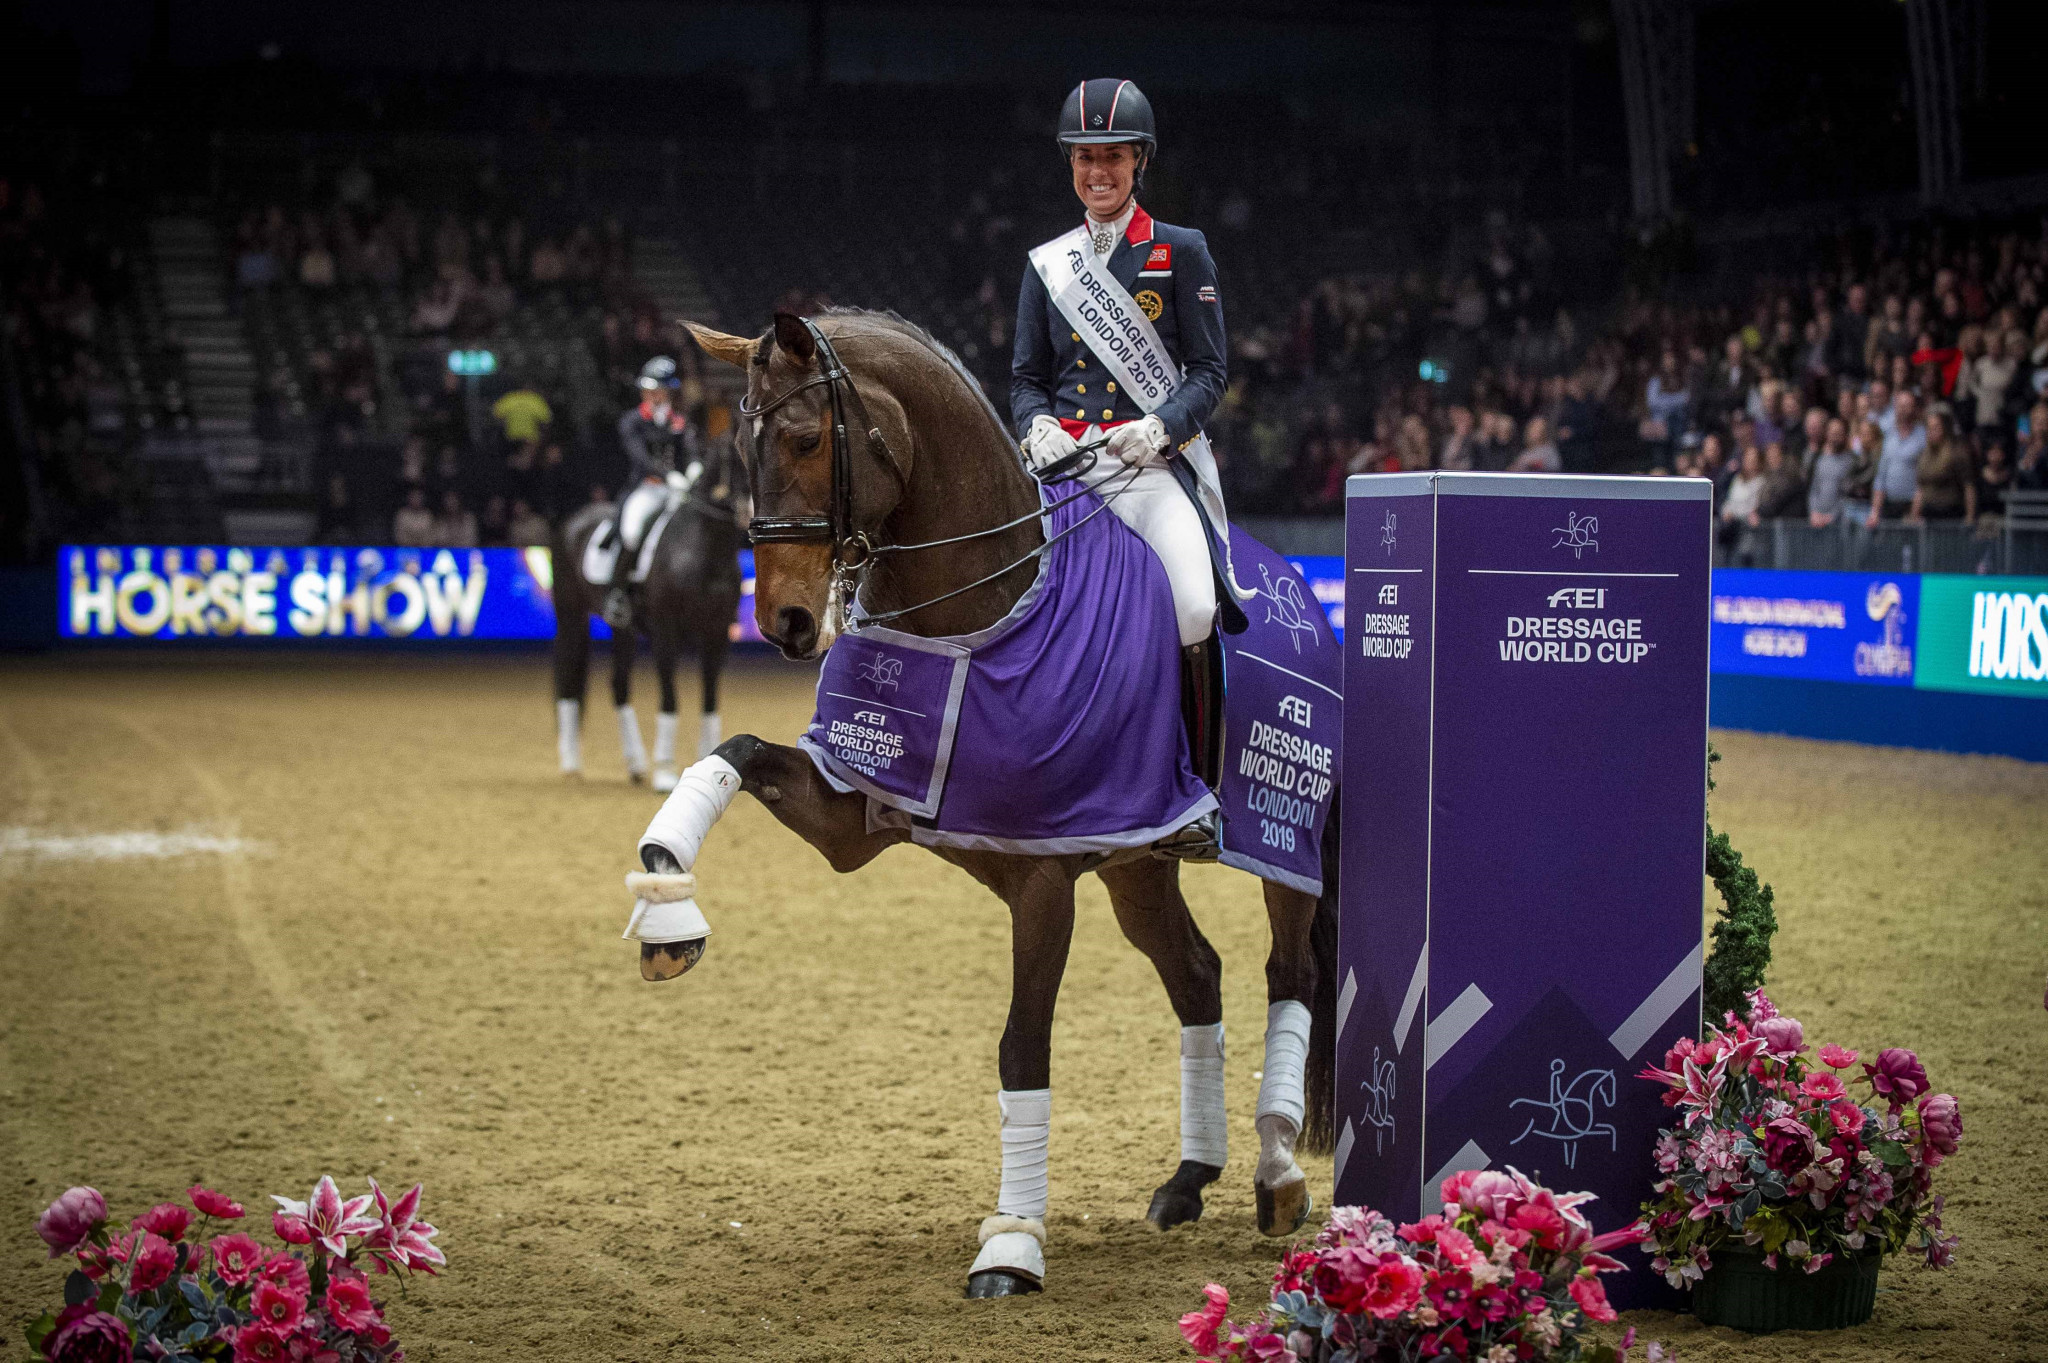 Great Britain's Charlotte Dujardin produced a superb victory with Mount St John Freestyle in the sixth leg of the 2019-2020 FEI Dressage World Cup Western European League in London ©FEI/Jon Stroud